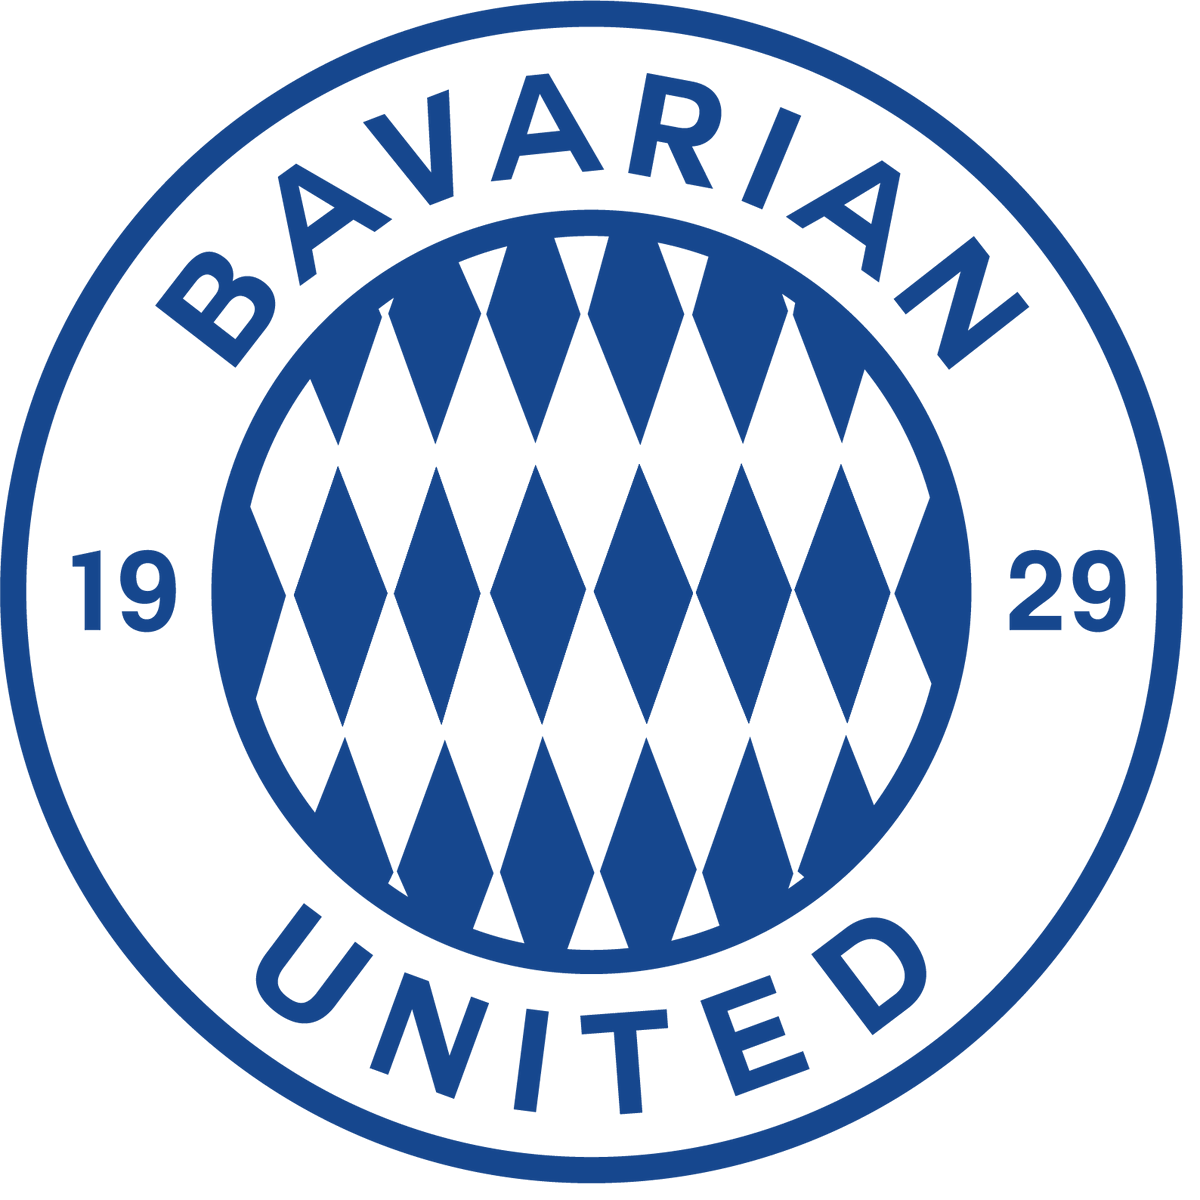 Bavarian United SC is back on top! The Wisconsin side wins the 2022 #USASA National Amateur Cup over Northern Virginia FC, 1-0. This is Bavarian's sixth national amateur title and first since 2018. Bavarian automatically qualifies for the 2023 #USOpenCup! #USOC2023